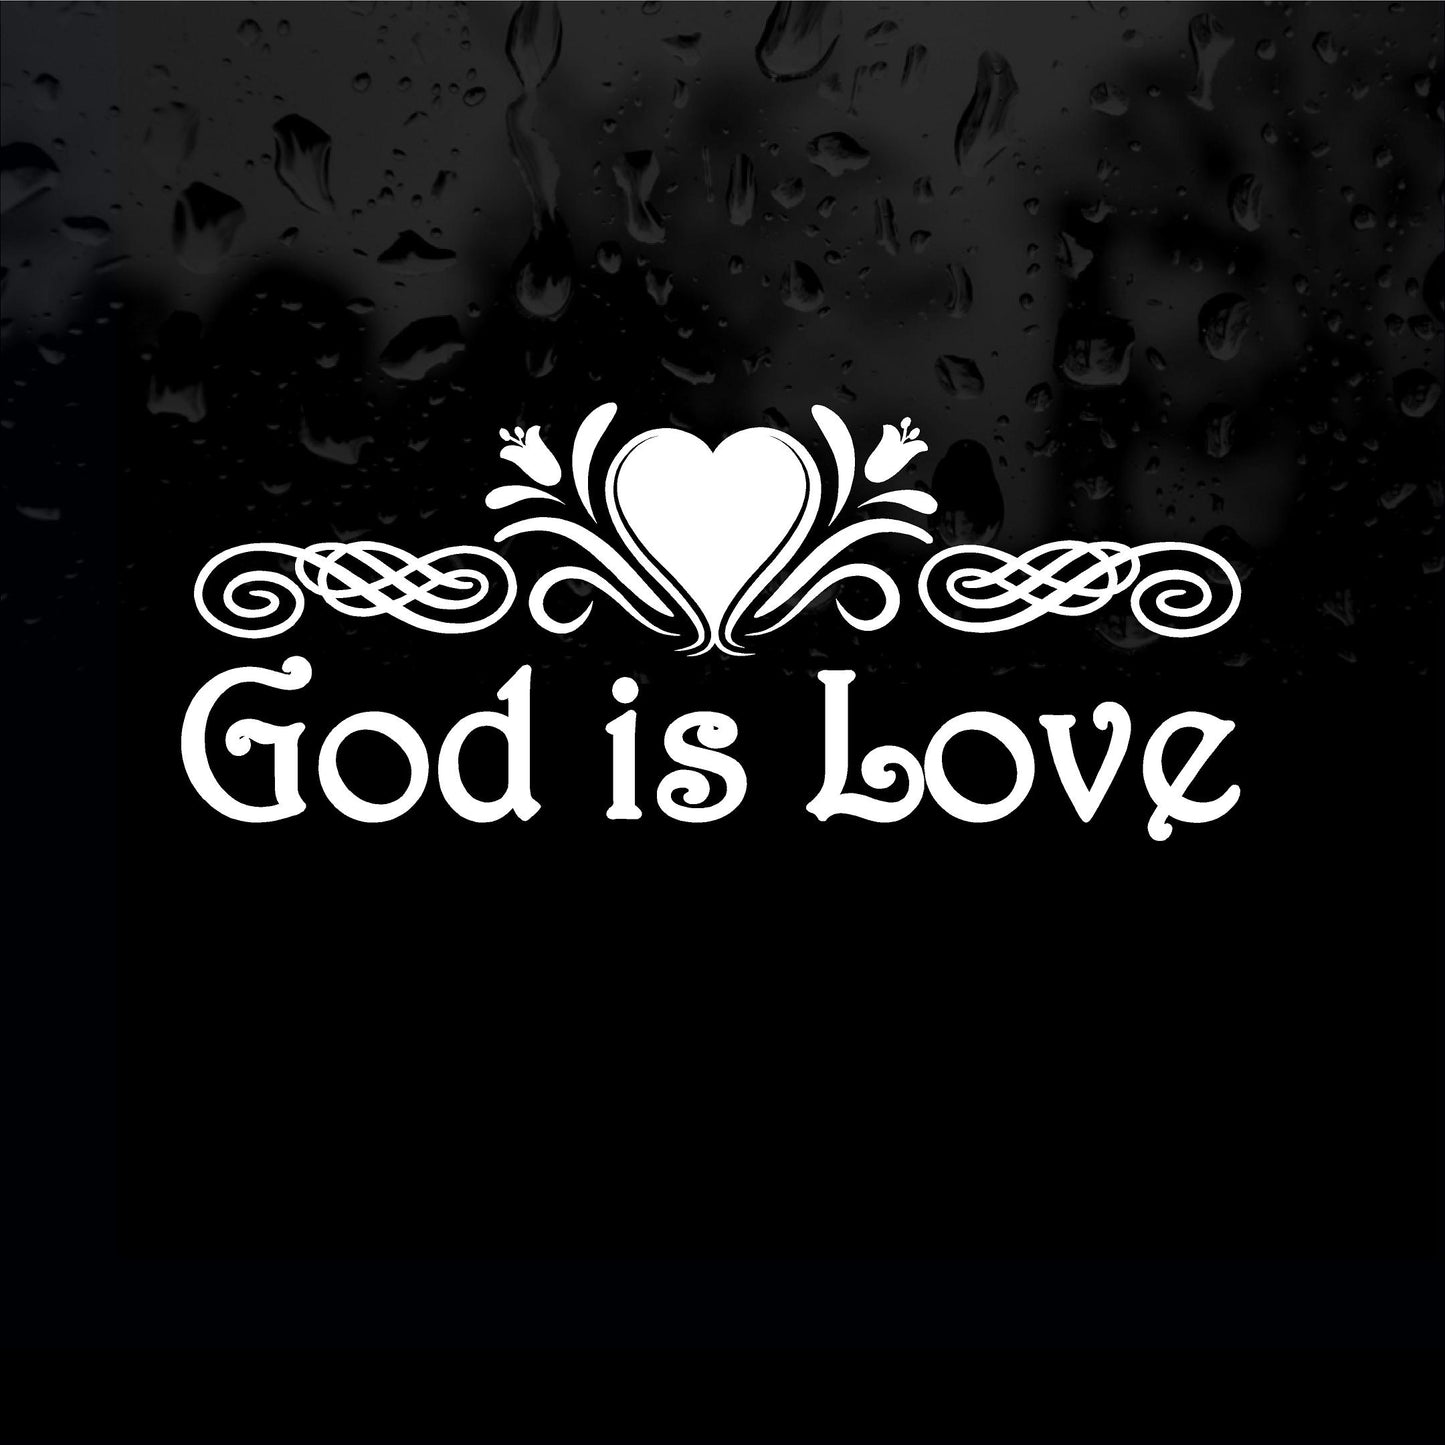 Decals - Religious - God is Love.